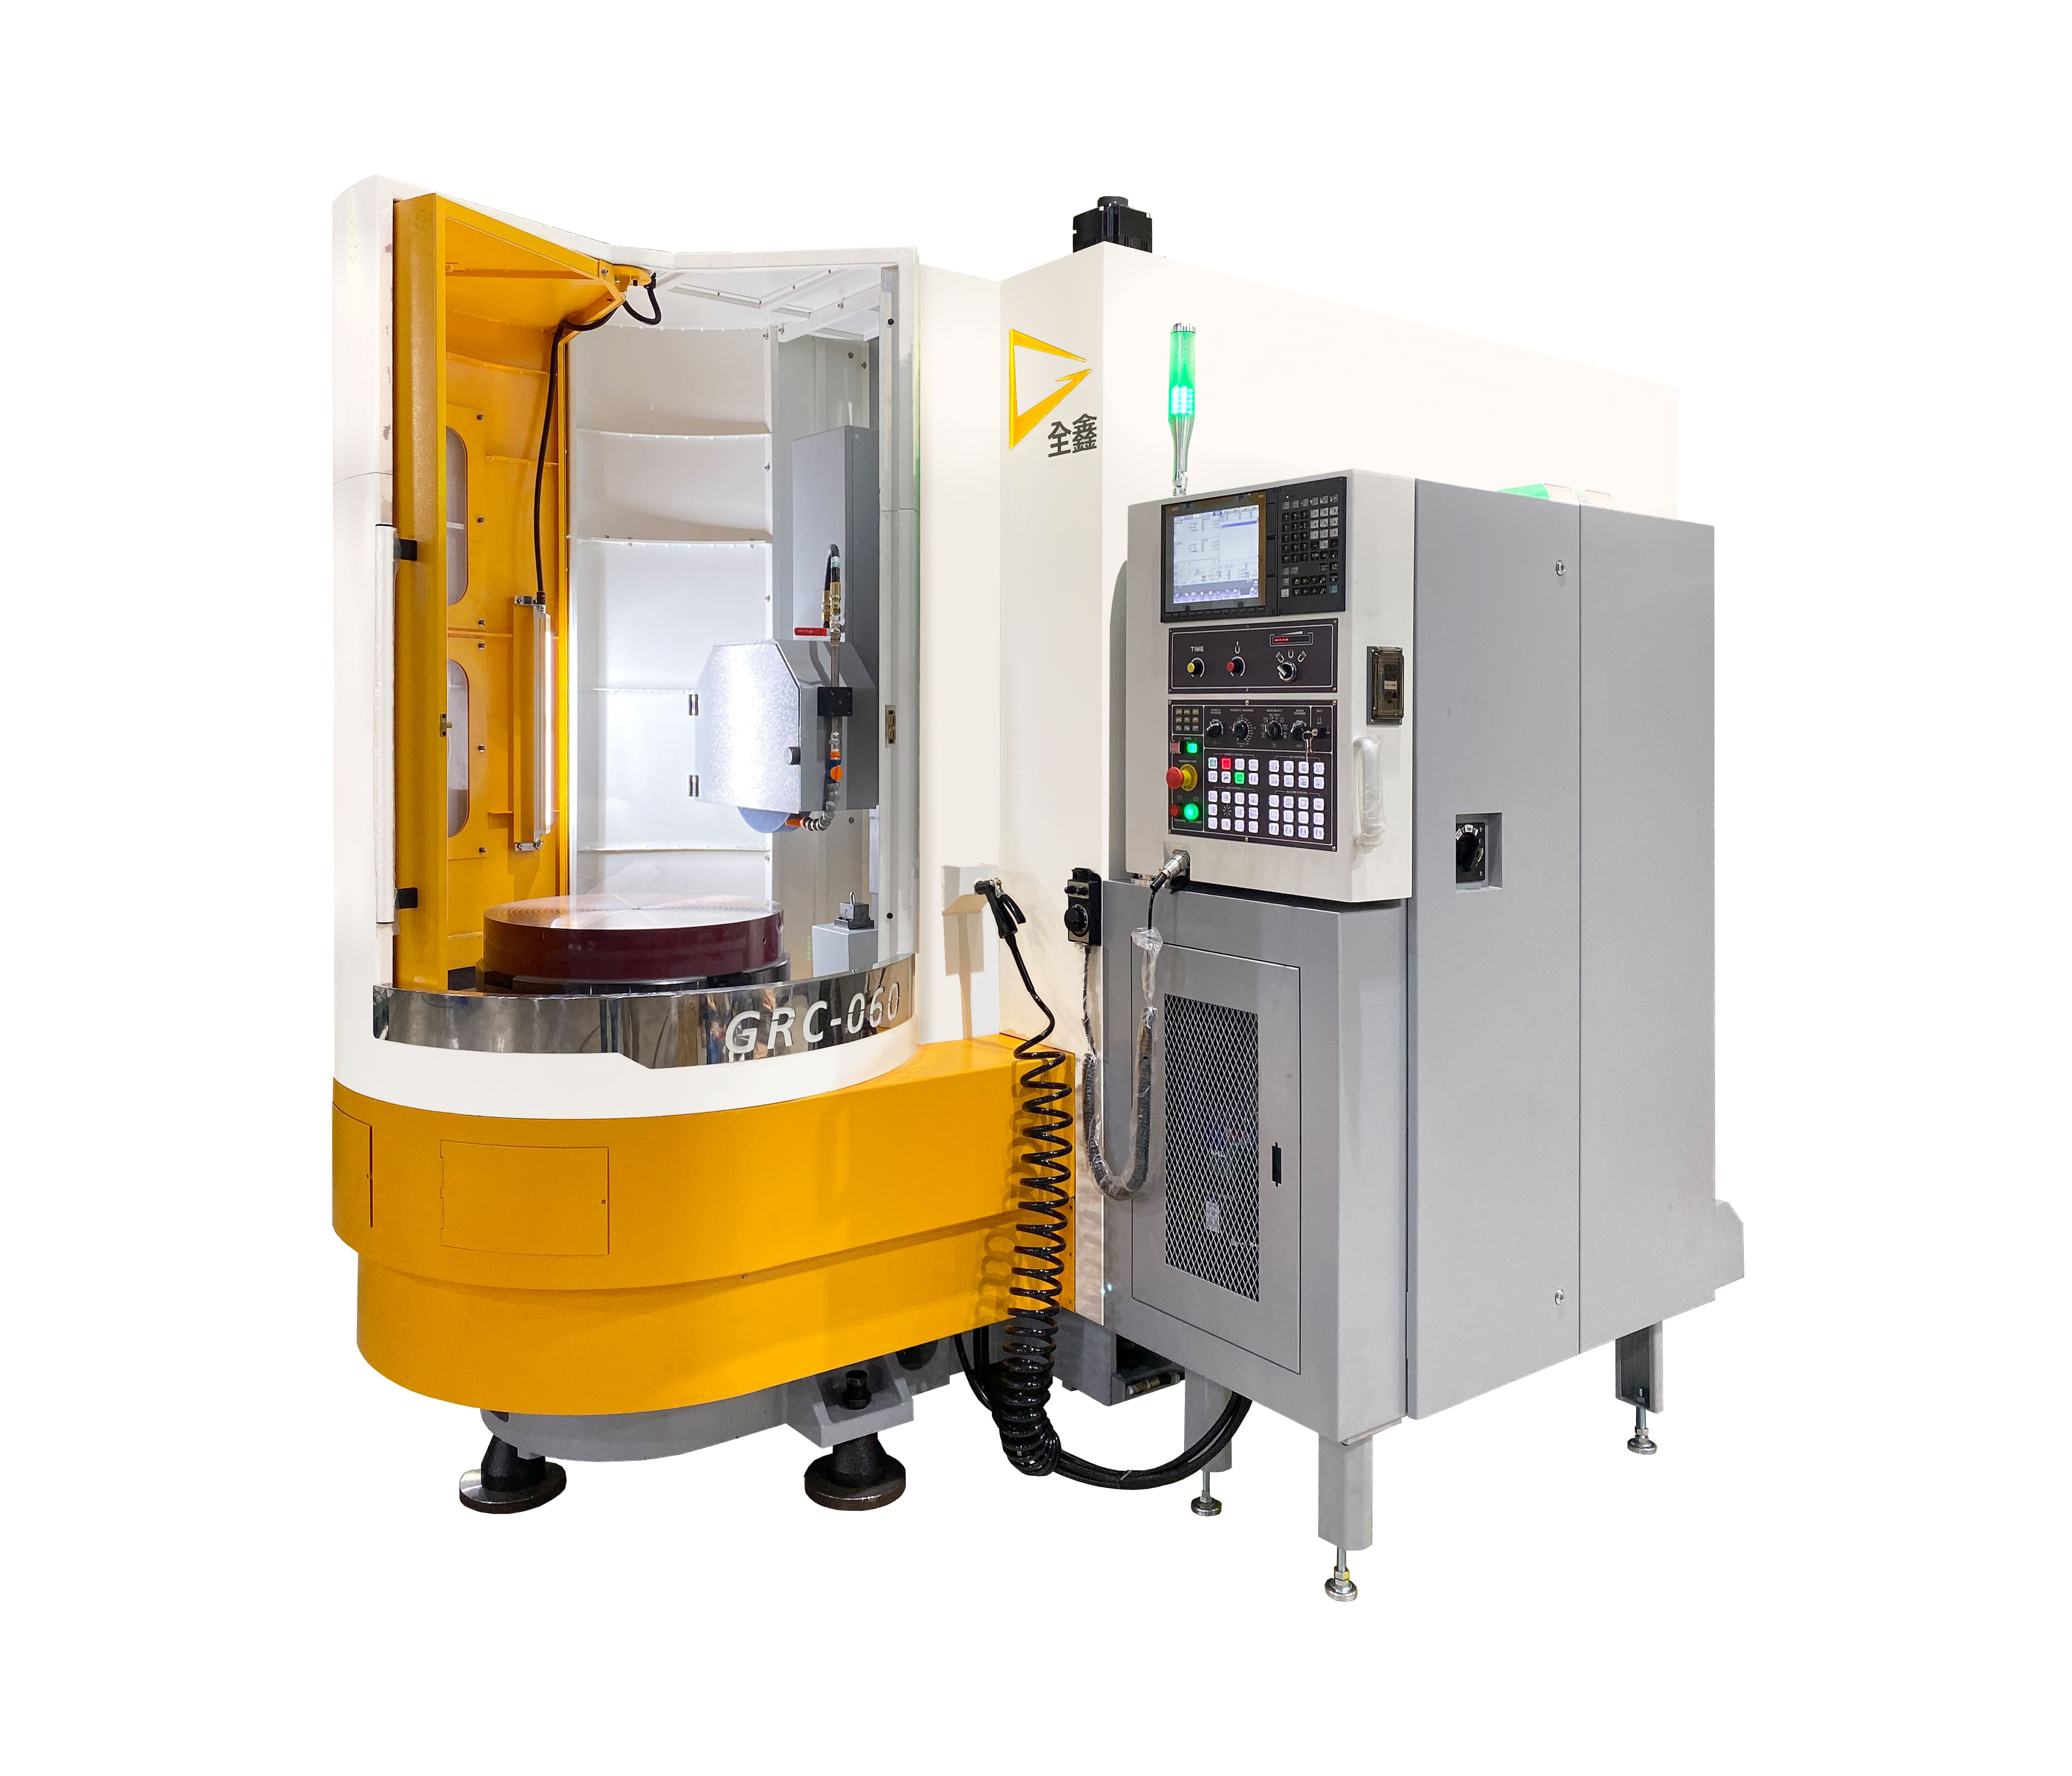 Video|GRC-060 Grinding Test with Japanese clients